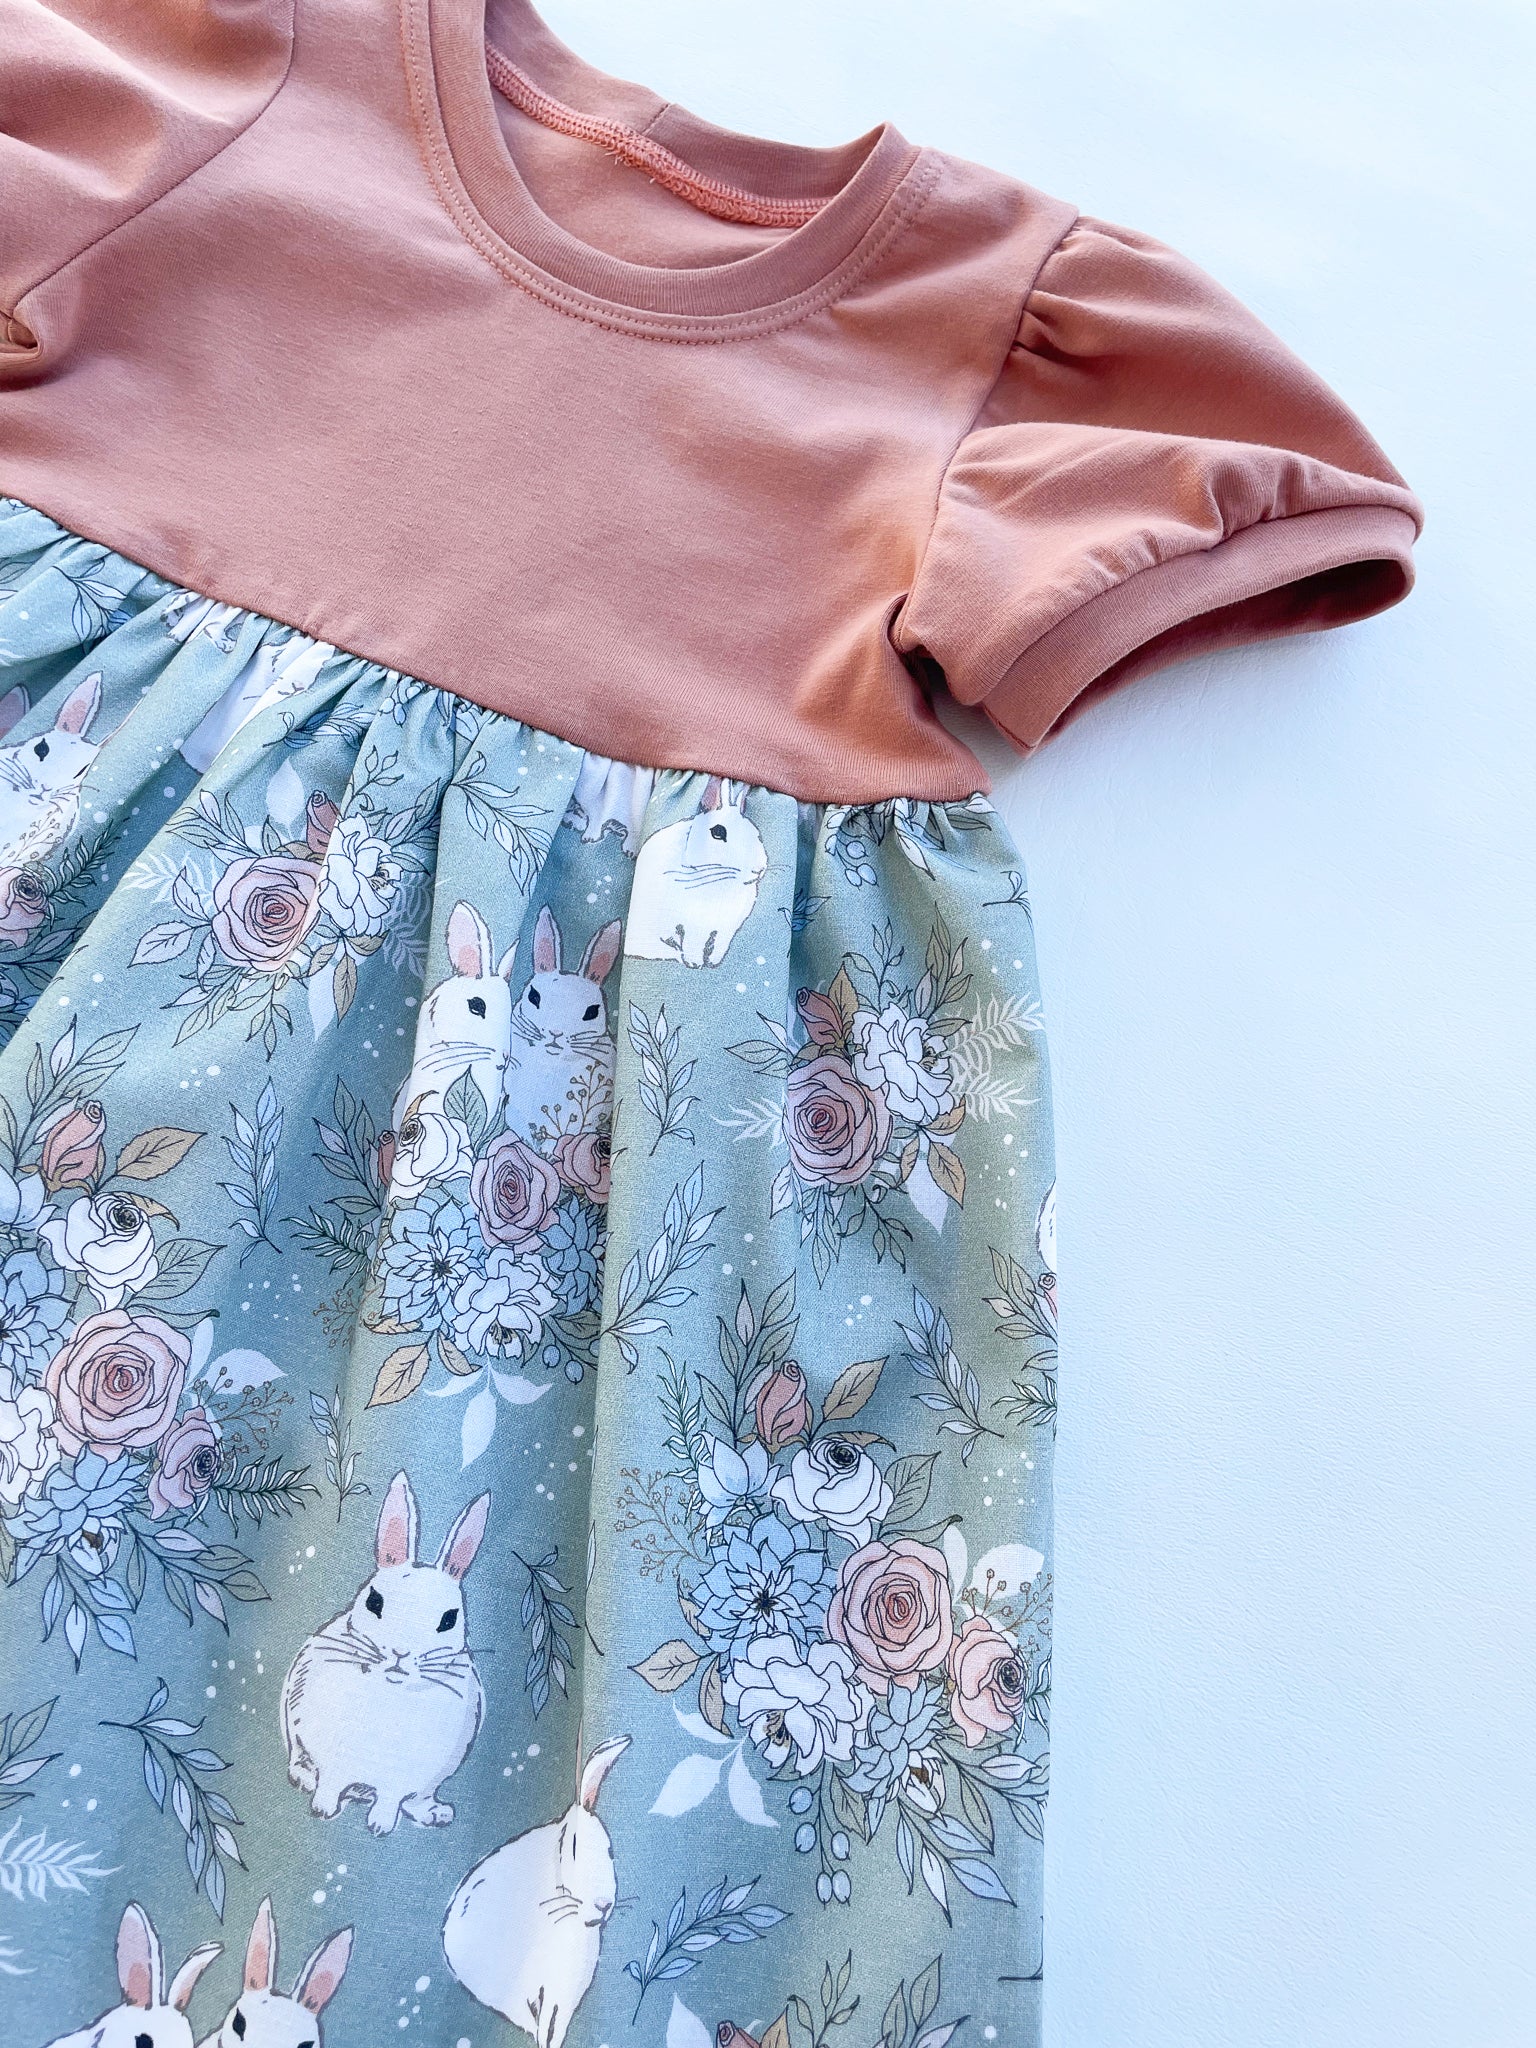 Garden Bunnies 🐰 Play Dress | Made with Organic Cotton *ships in 1-2 weeks*